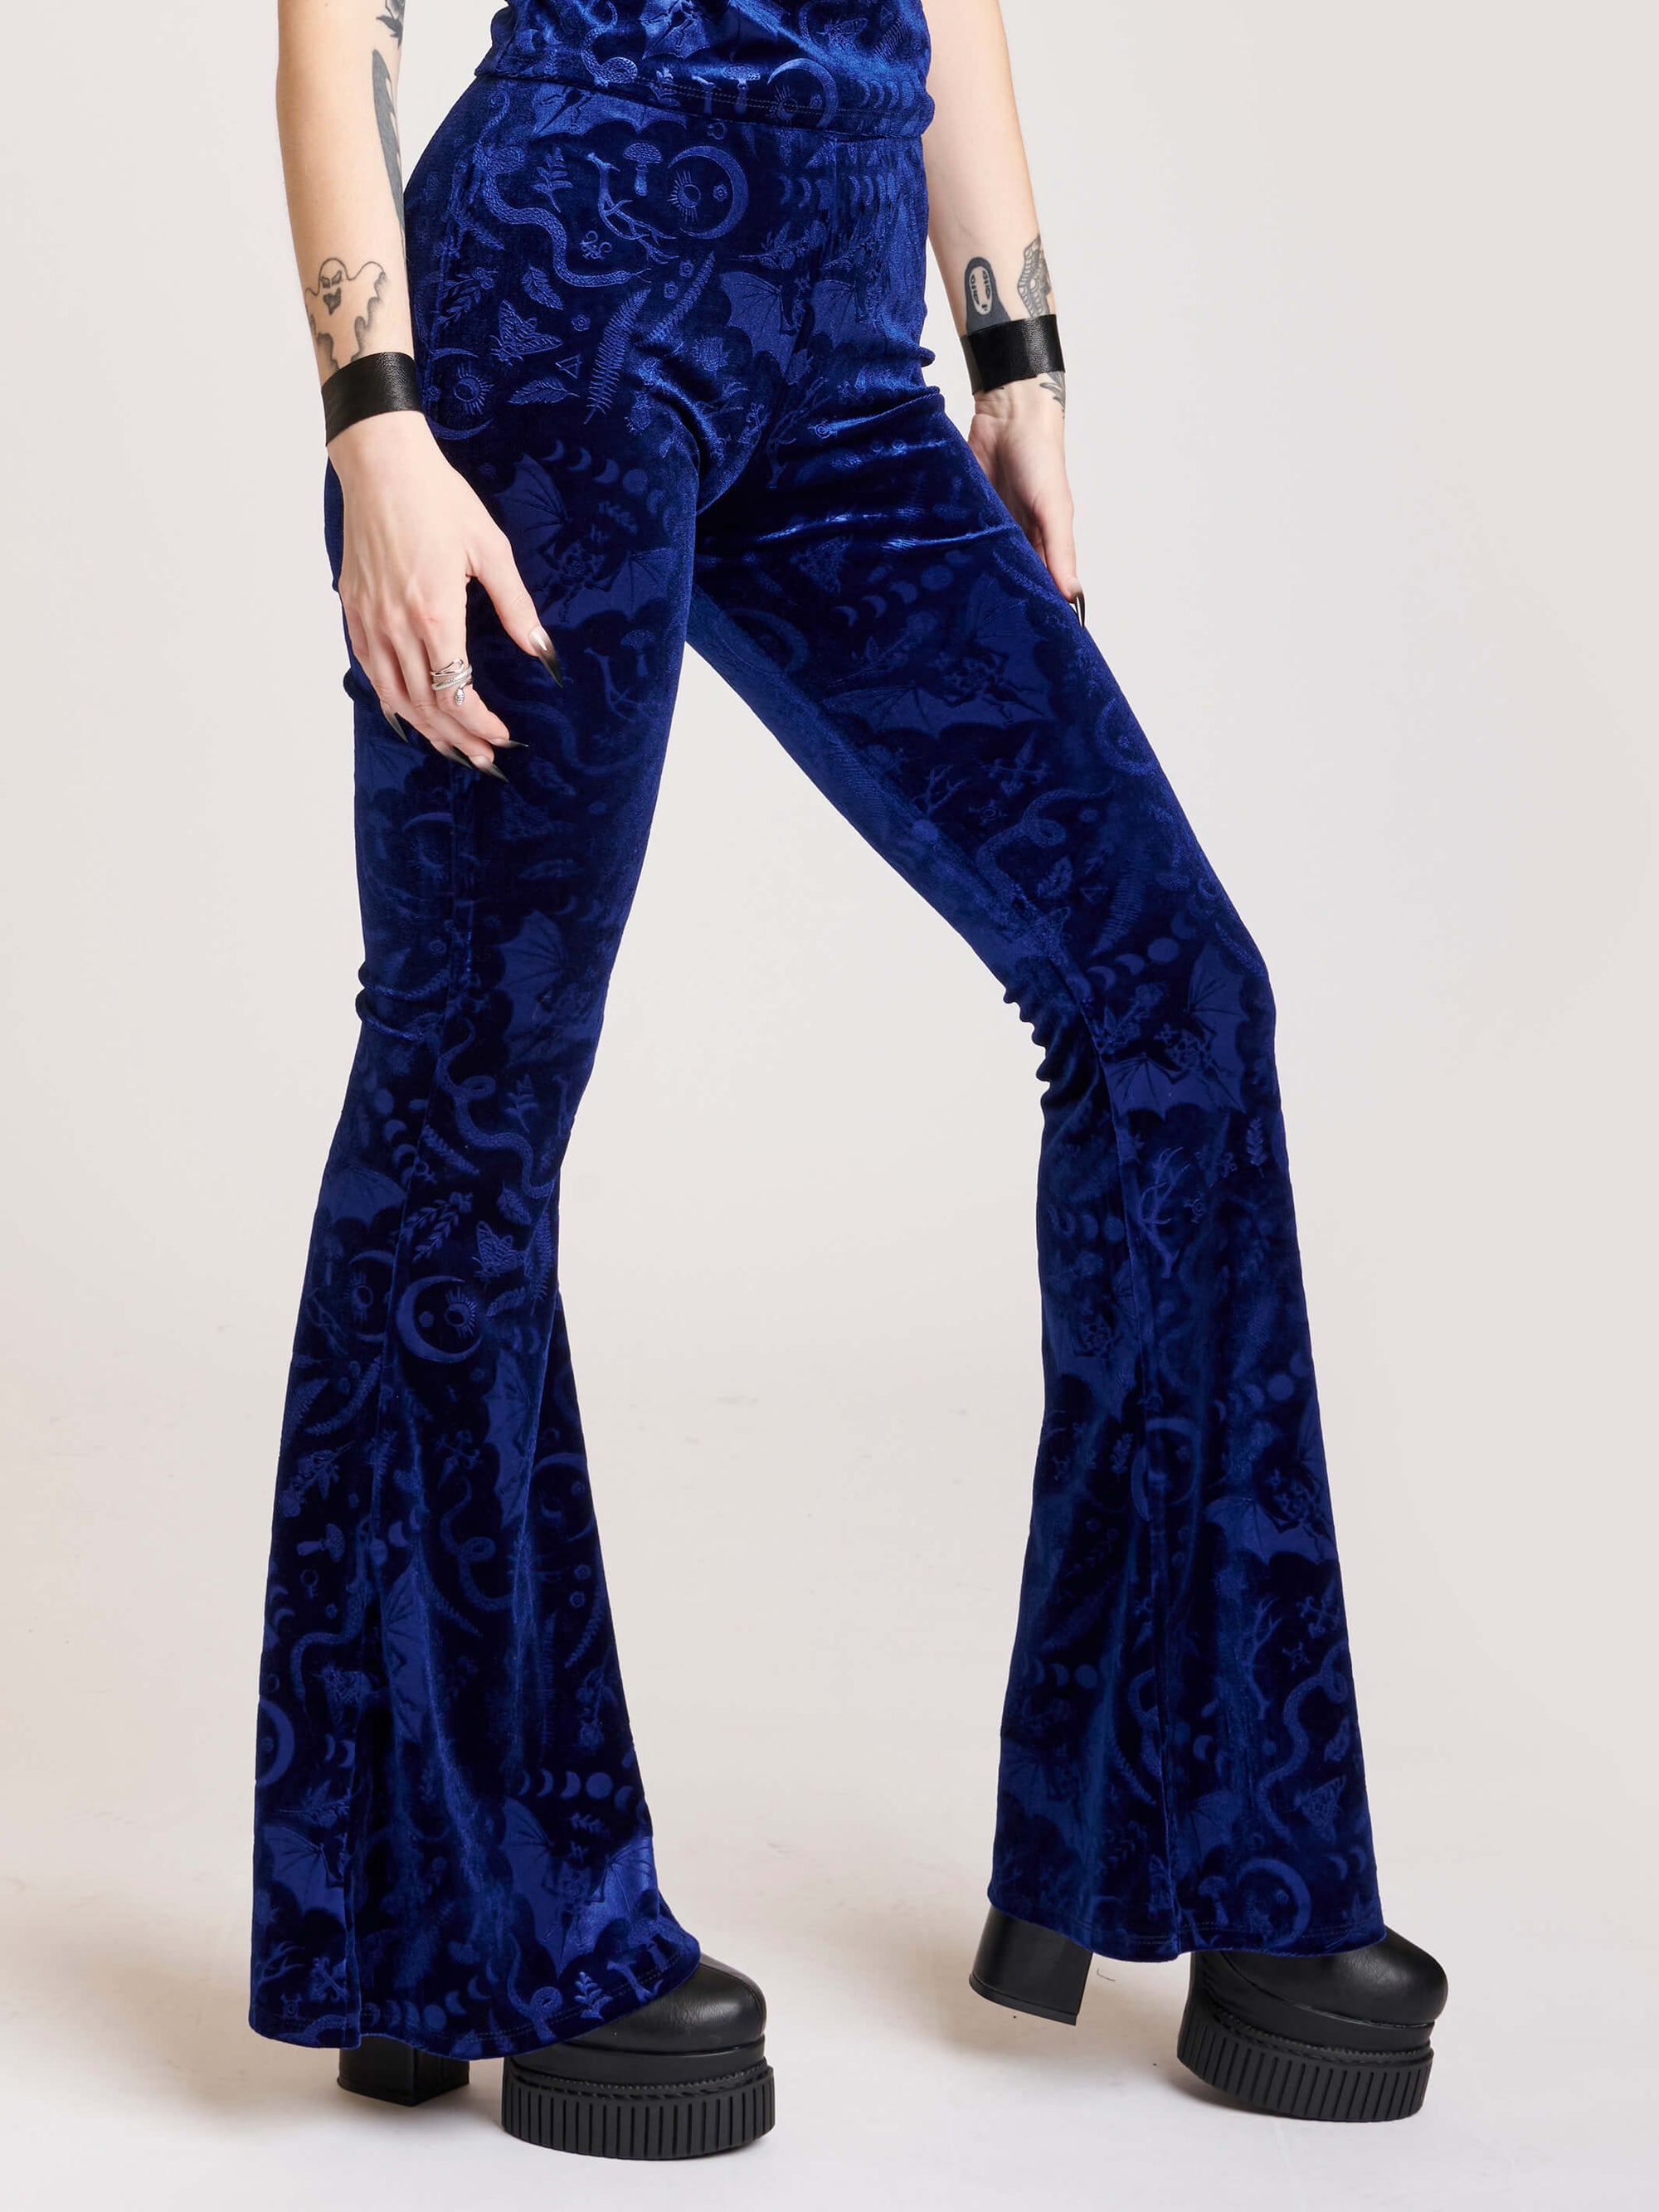 embossed velvet flaired pants with forest findings symbols